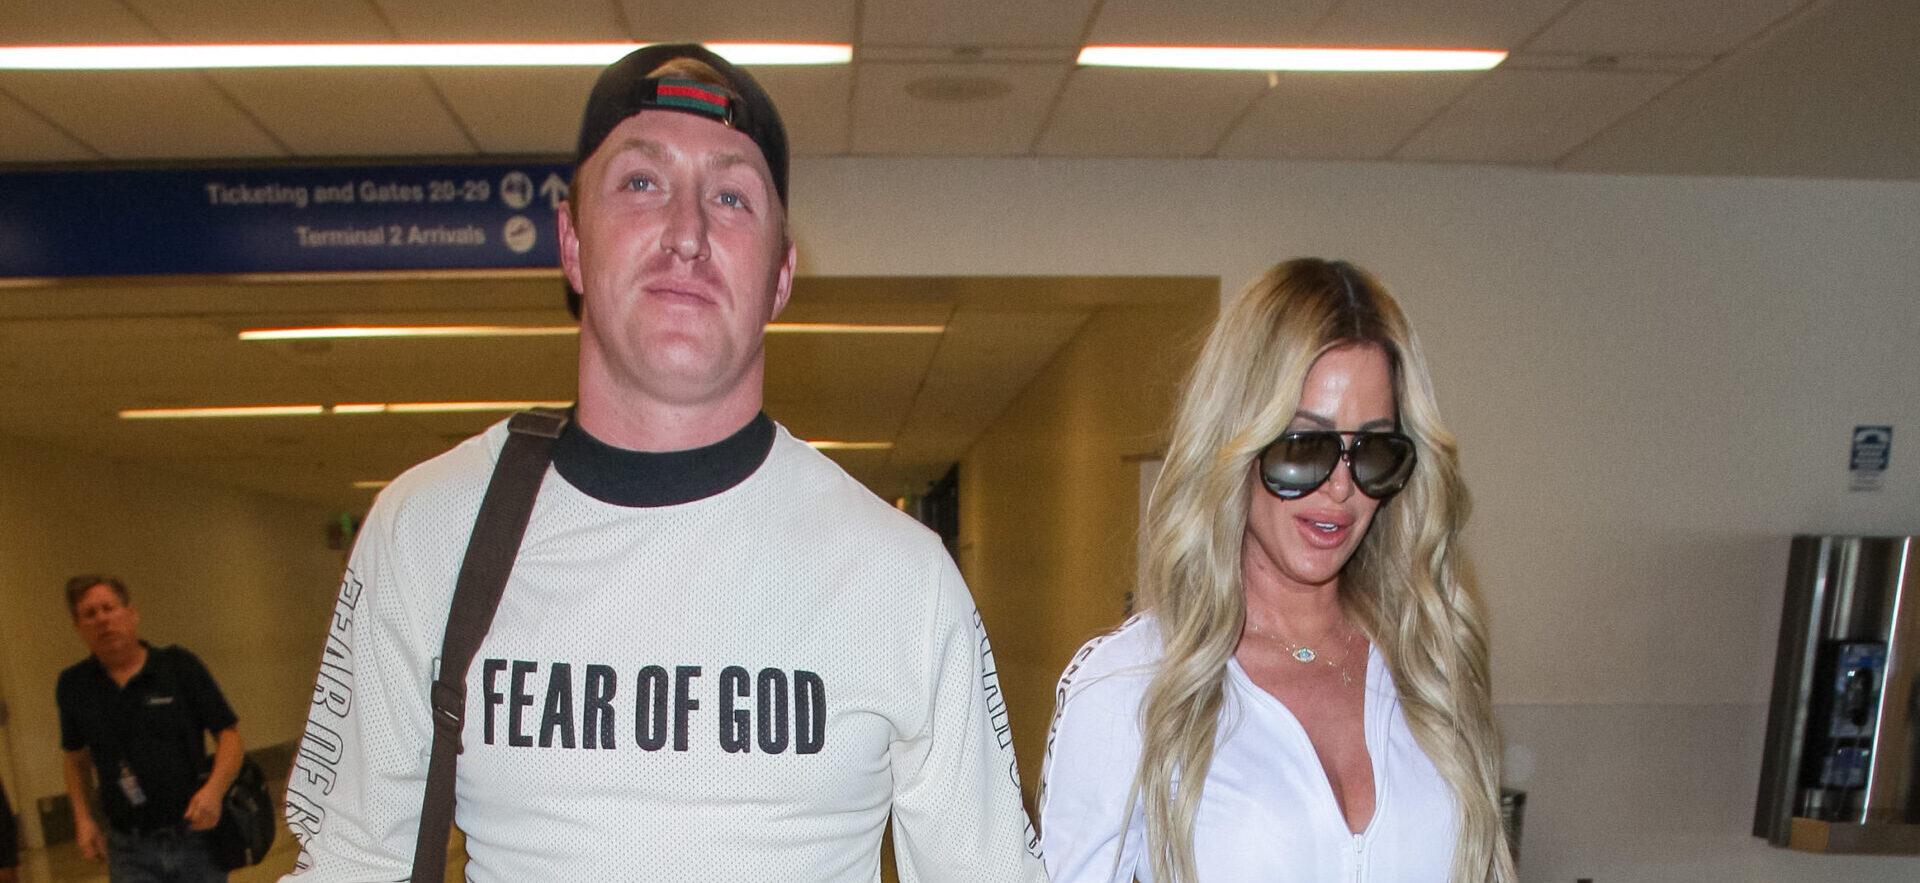 Will Kim Zolciak & Kroy Biermann Have To Give Up Their Mansion?